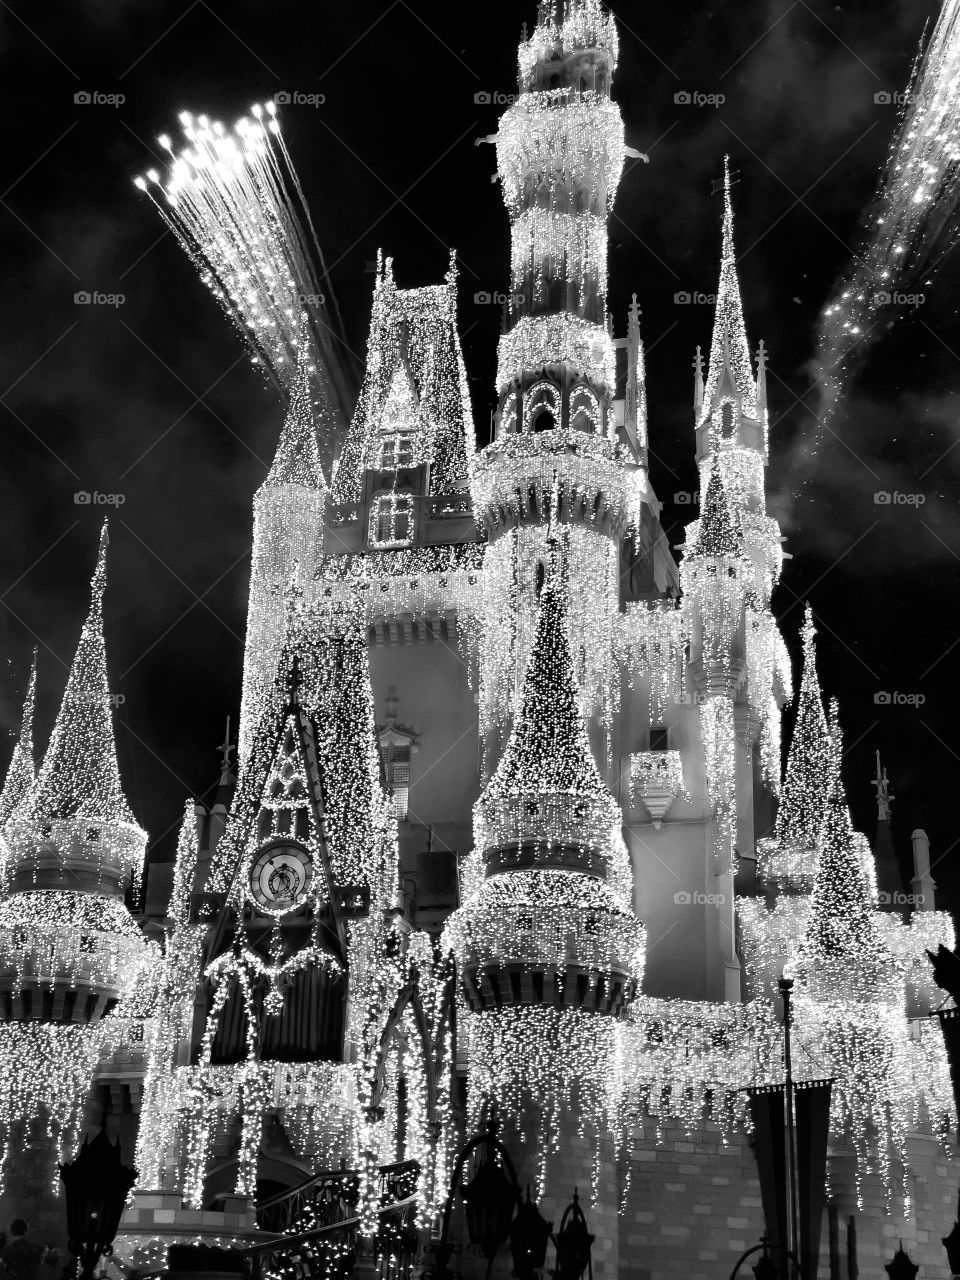 Black and white Magic Kingdom Cinderella’s Castle with winter icesicle lights and fireworks going off 